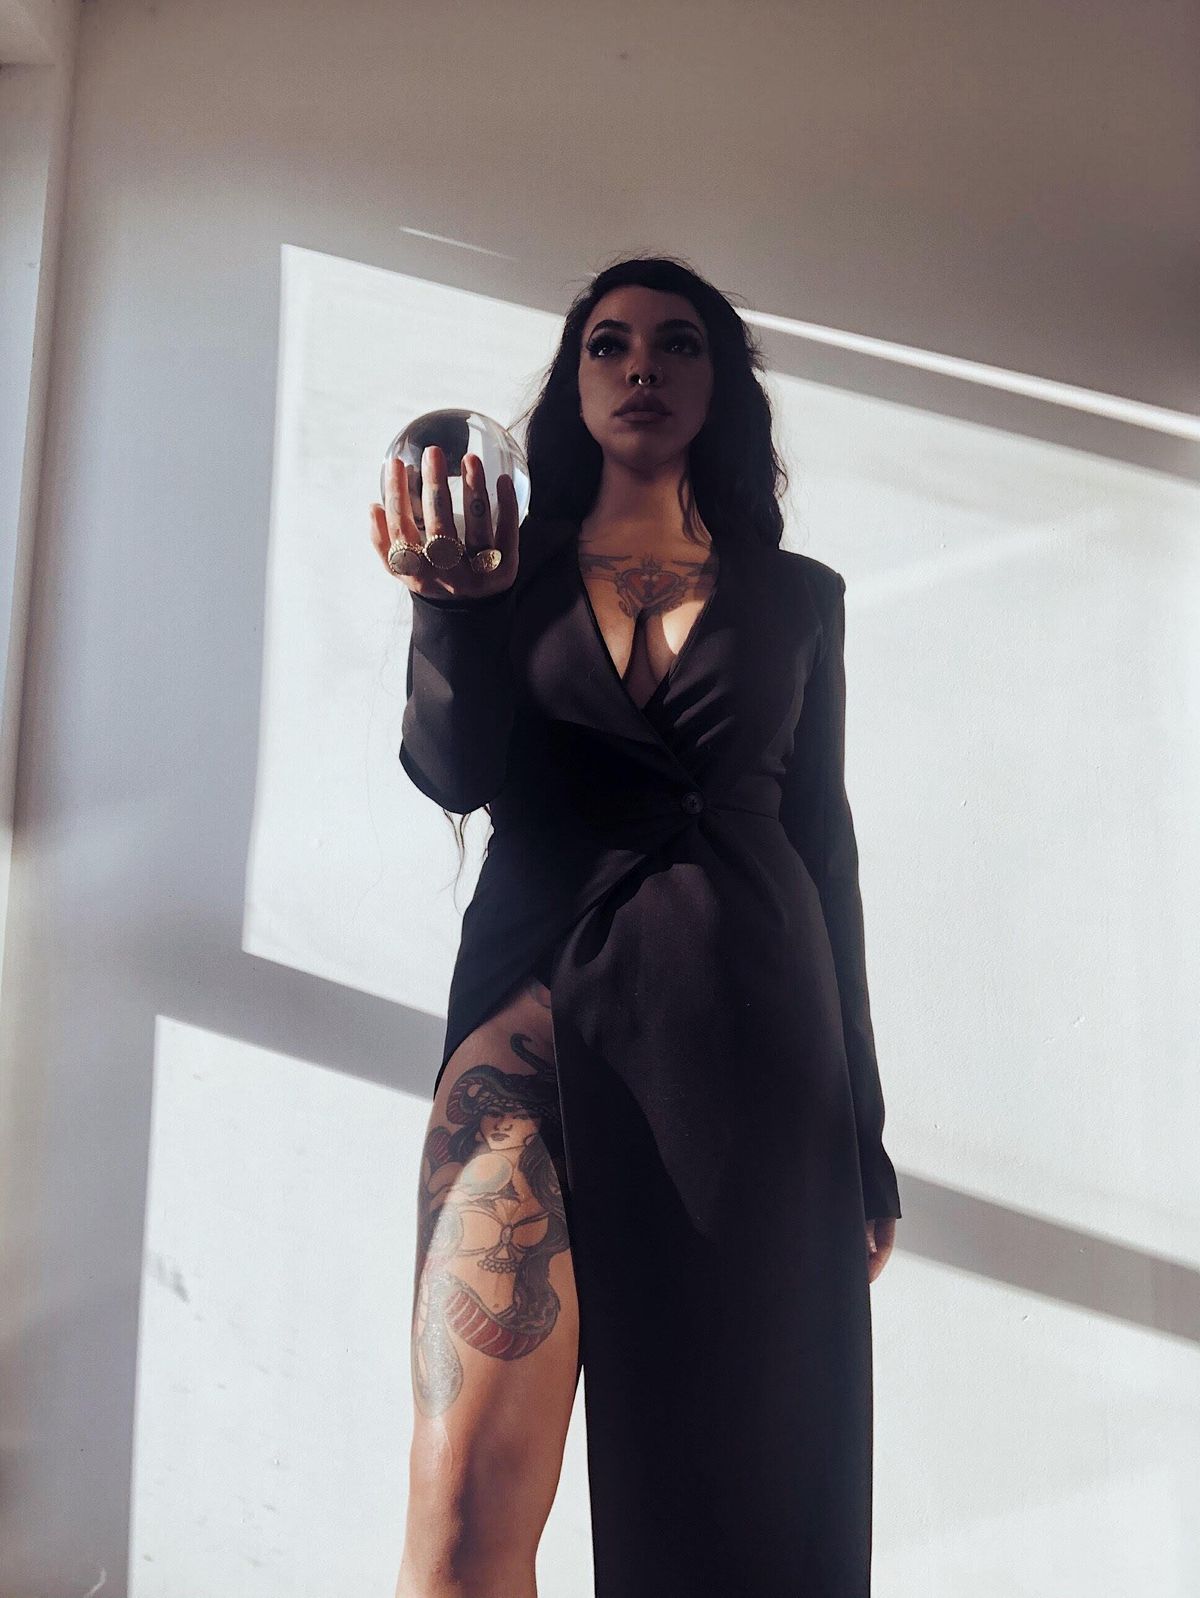 Into the Void: An Obsidian Mediation with Bri Luna of The Hoodwitch